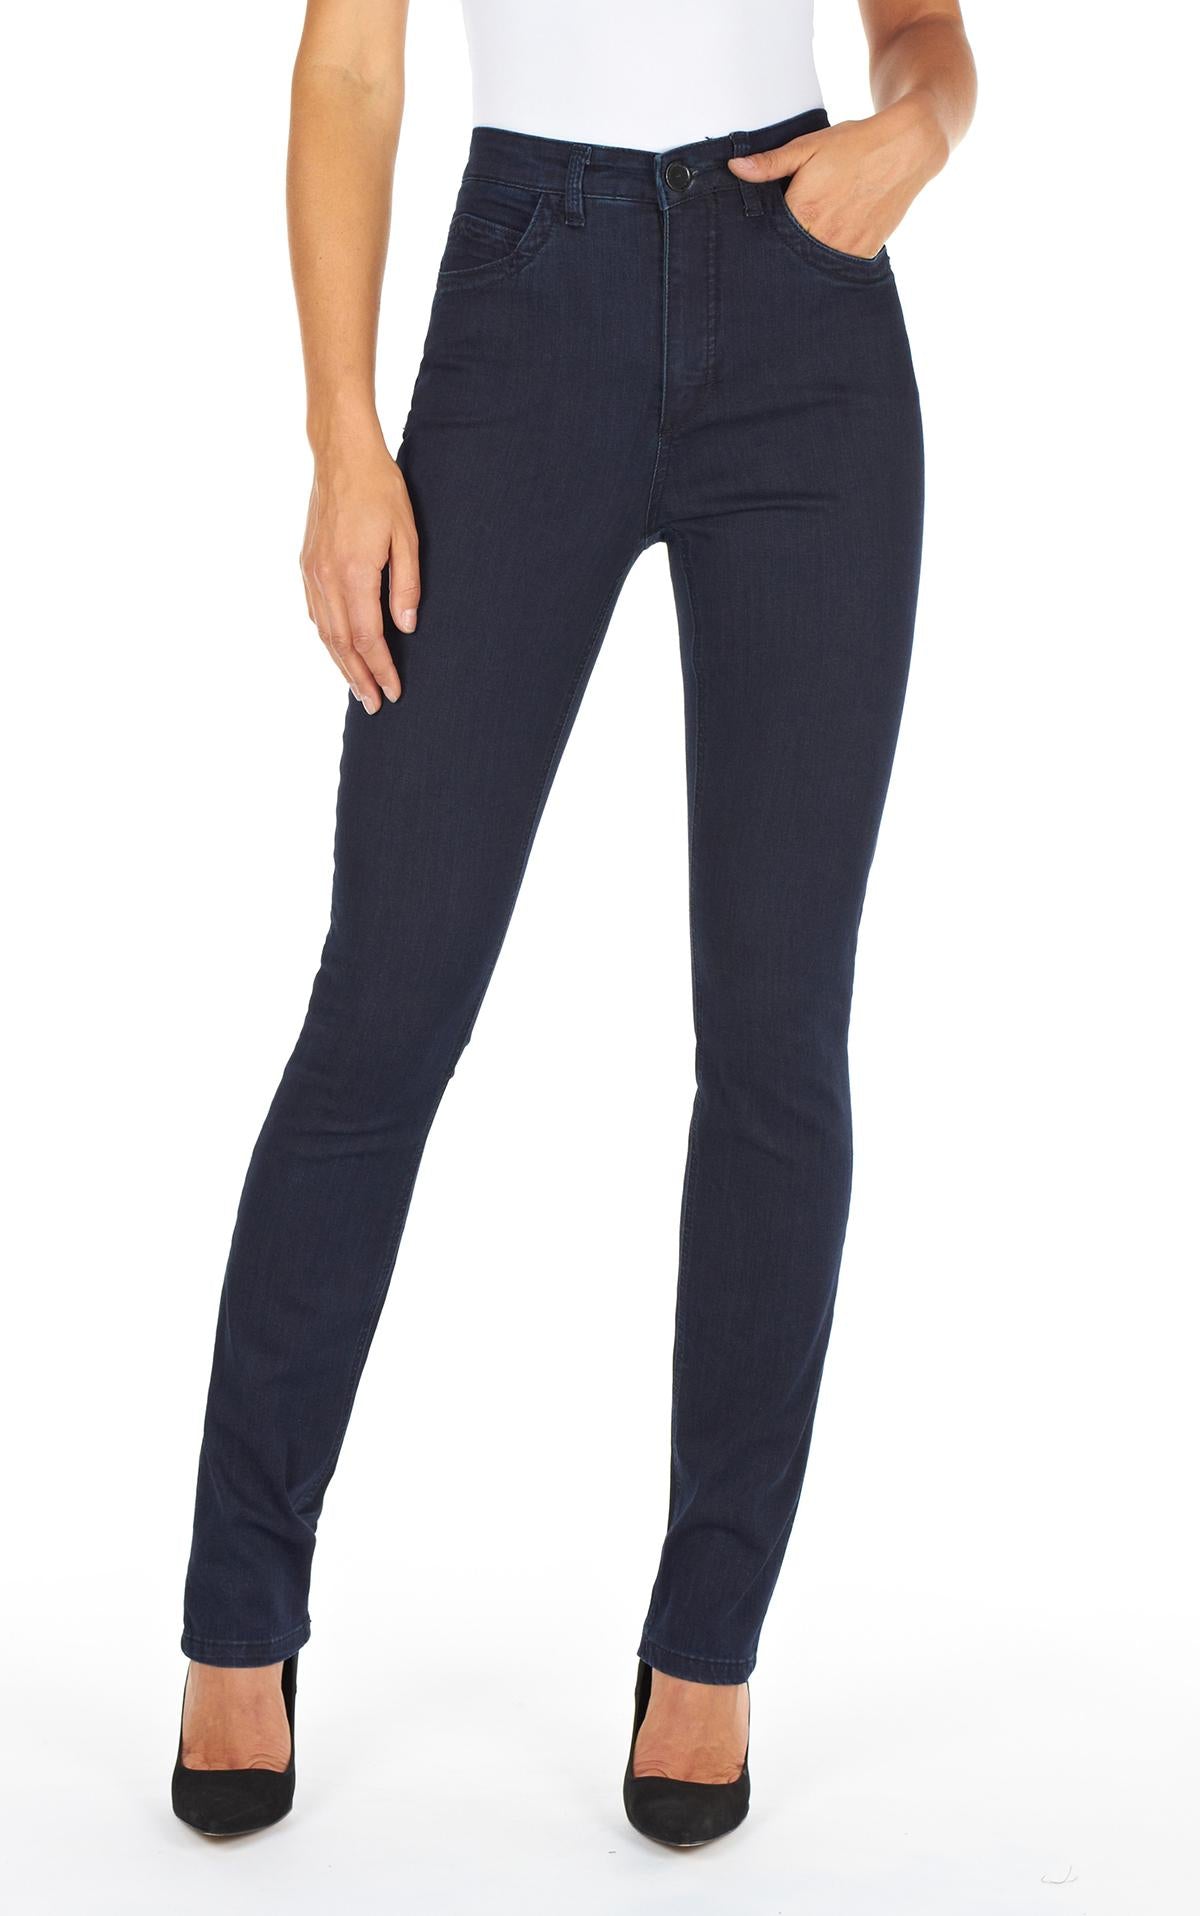 Petite Suzanne Relaxed Slim Leg Style 8473250 Supreme Denim French Dressing Jeans